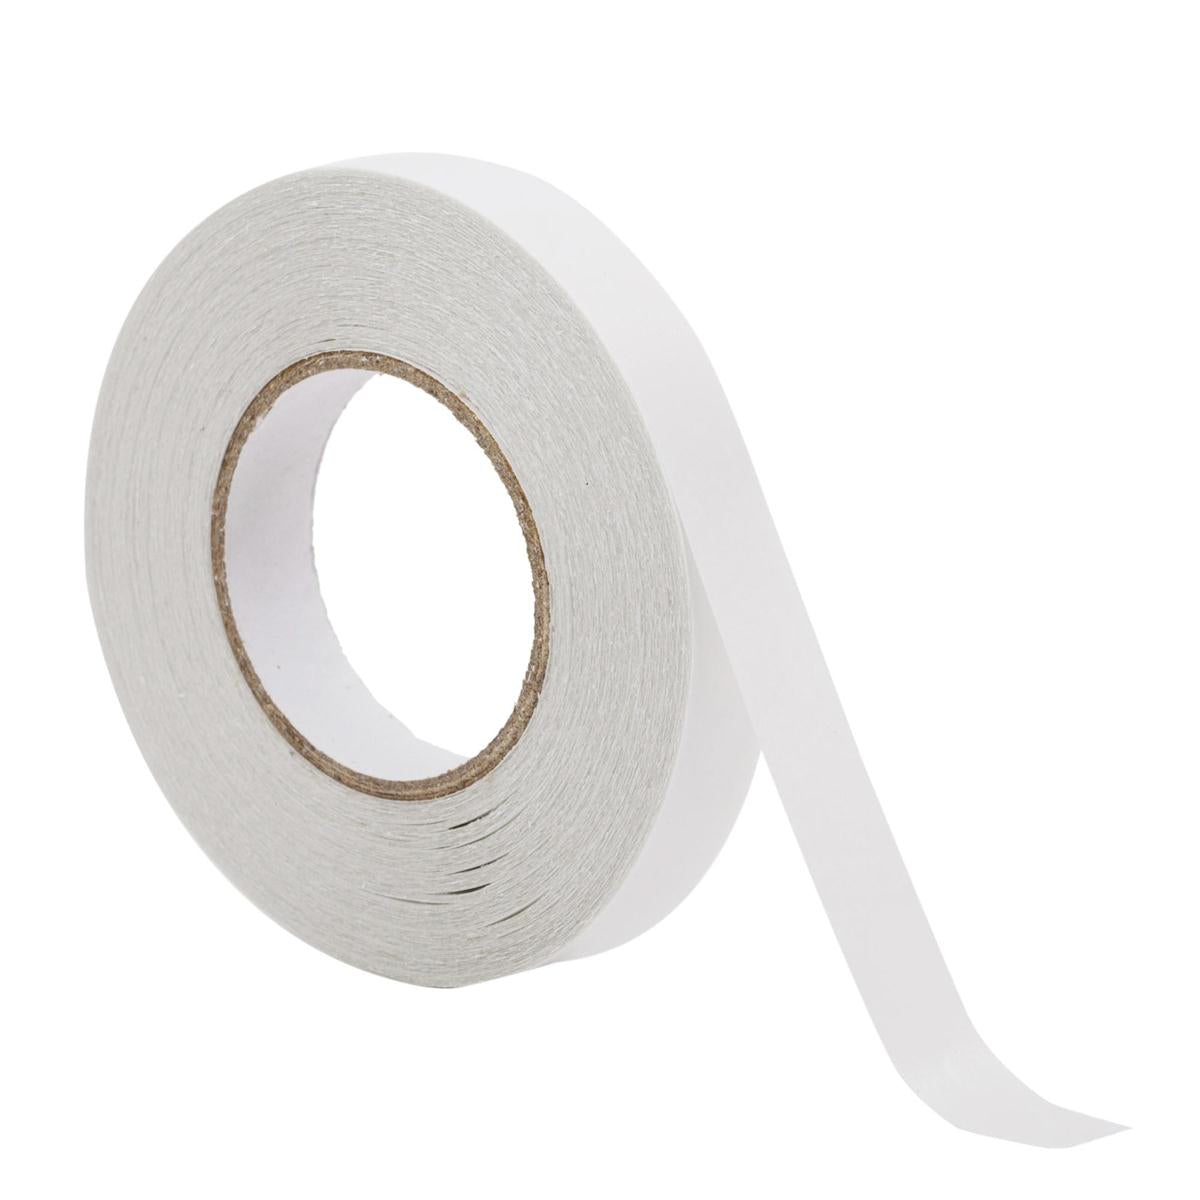 Office Works Double Sided Tape 12mm x 20m